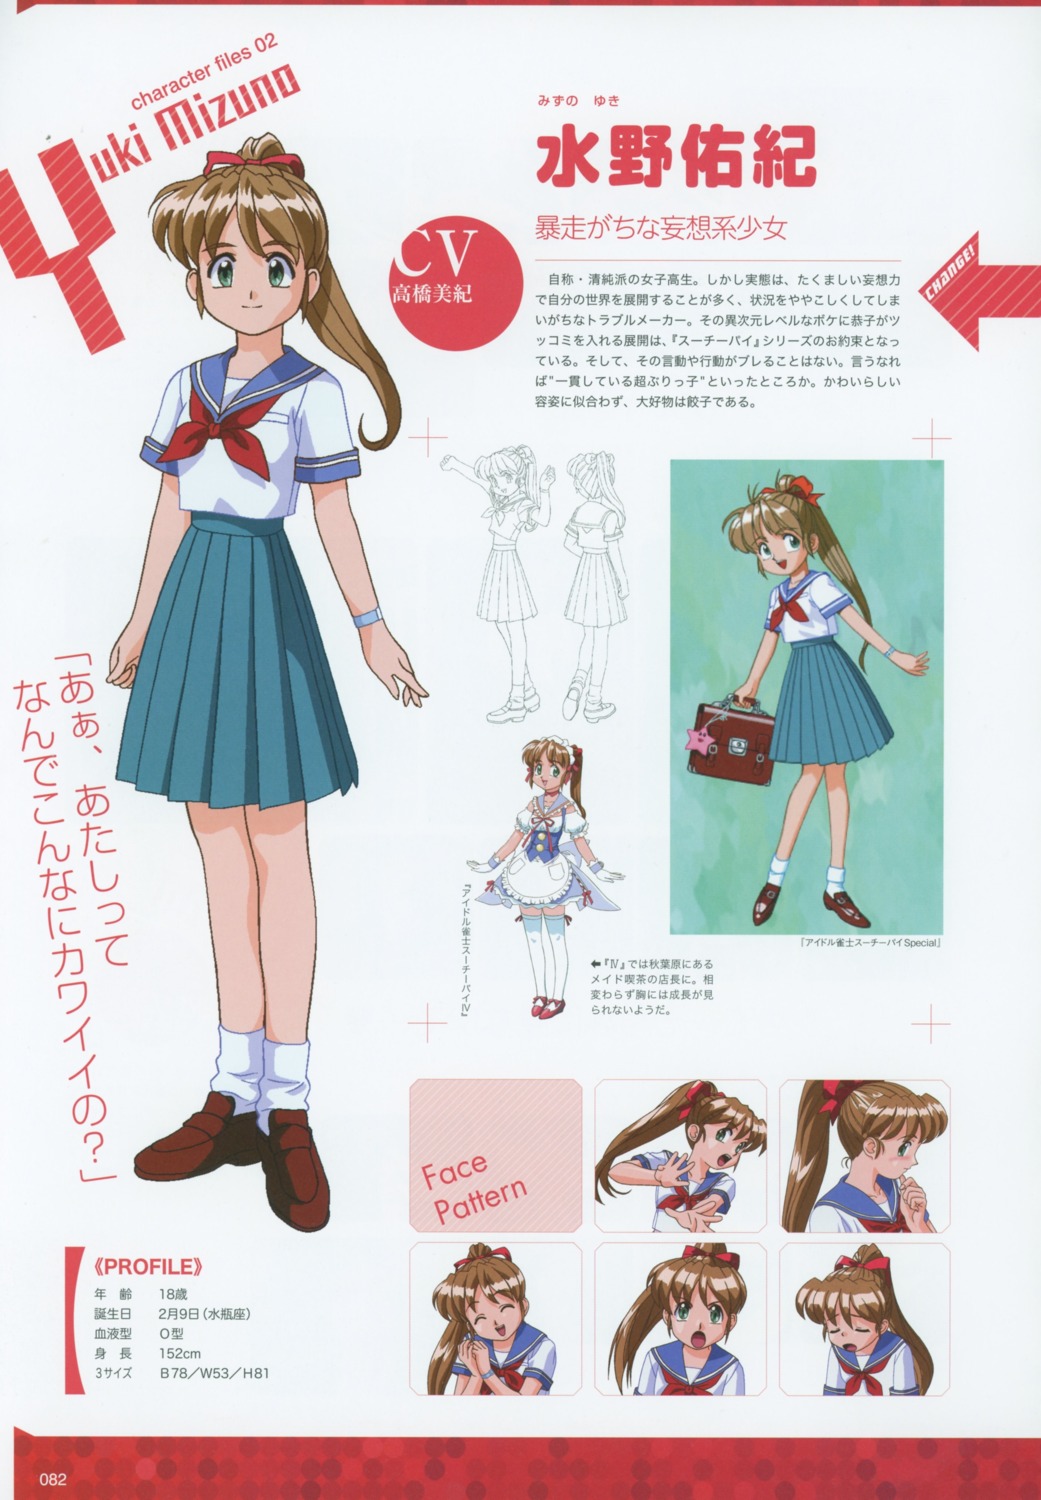 Character Design Expression Profile Page Seifuku me Yande Re